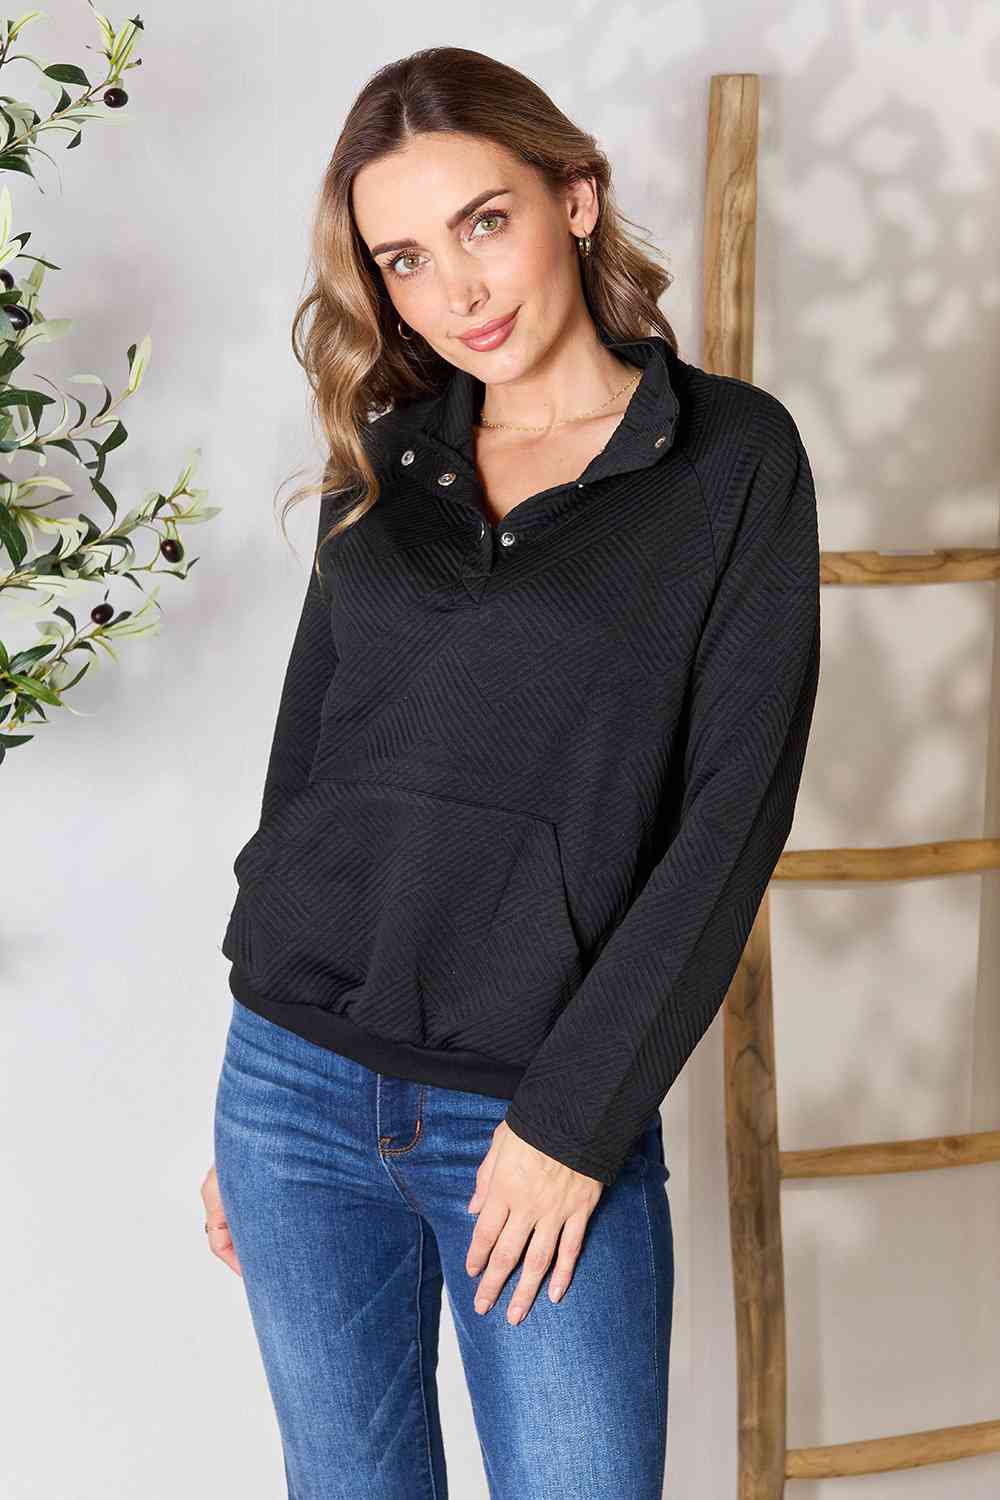 Double Take Half Buttoned Collared Neck Sweatshirt with Pocket 2